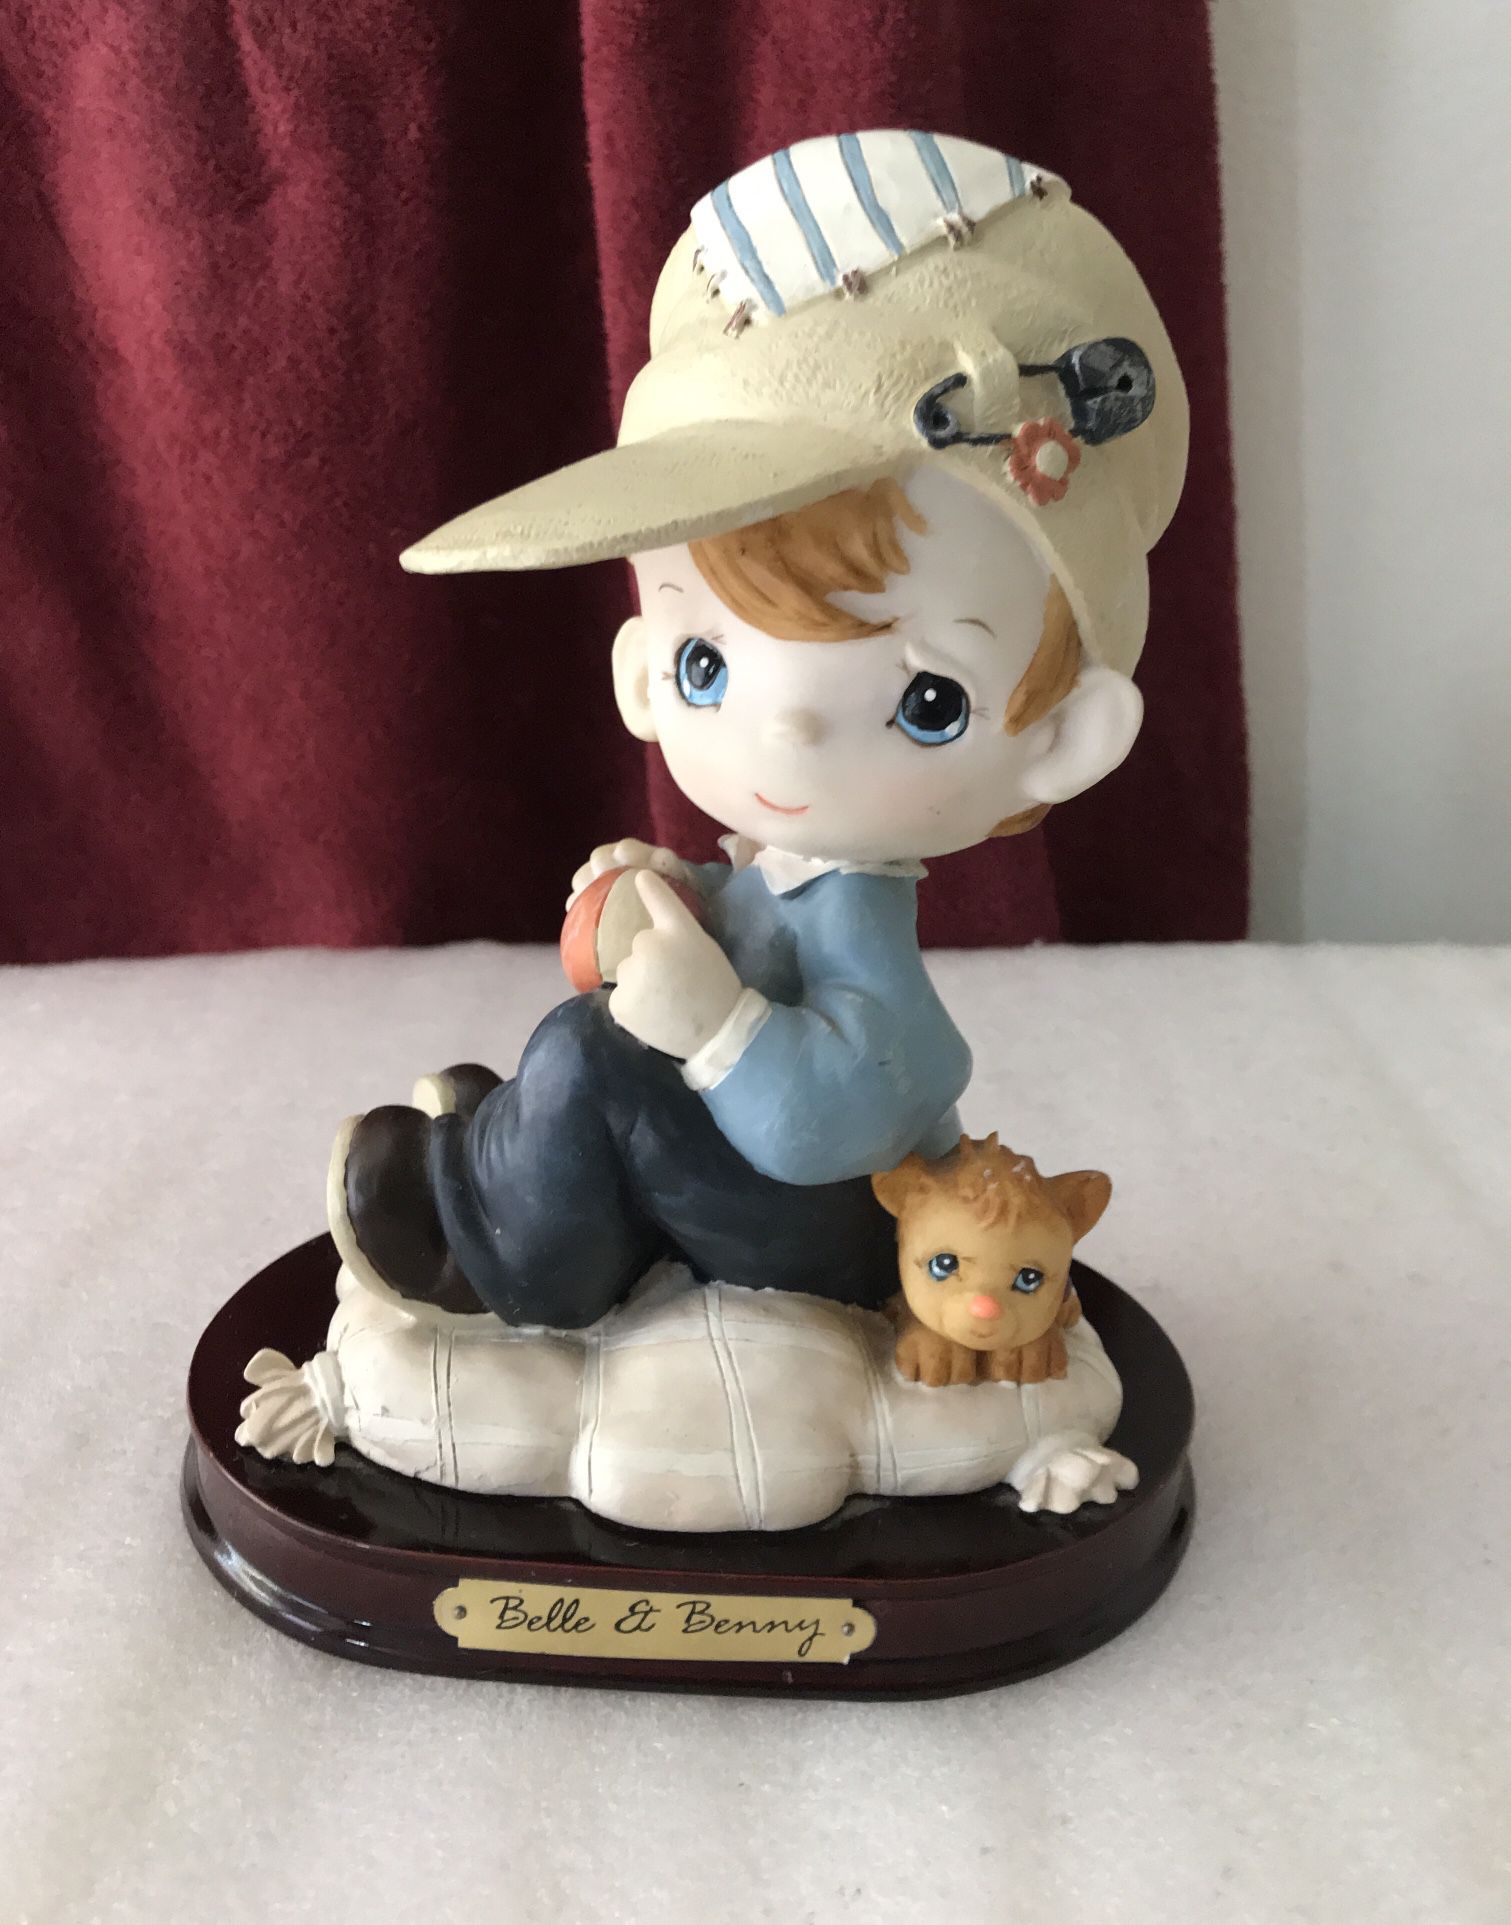 Turtle King Corp. Belle & Benny Precious Moments Figurine